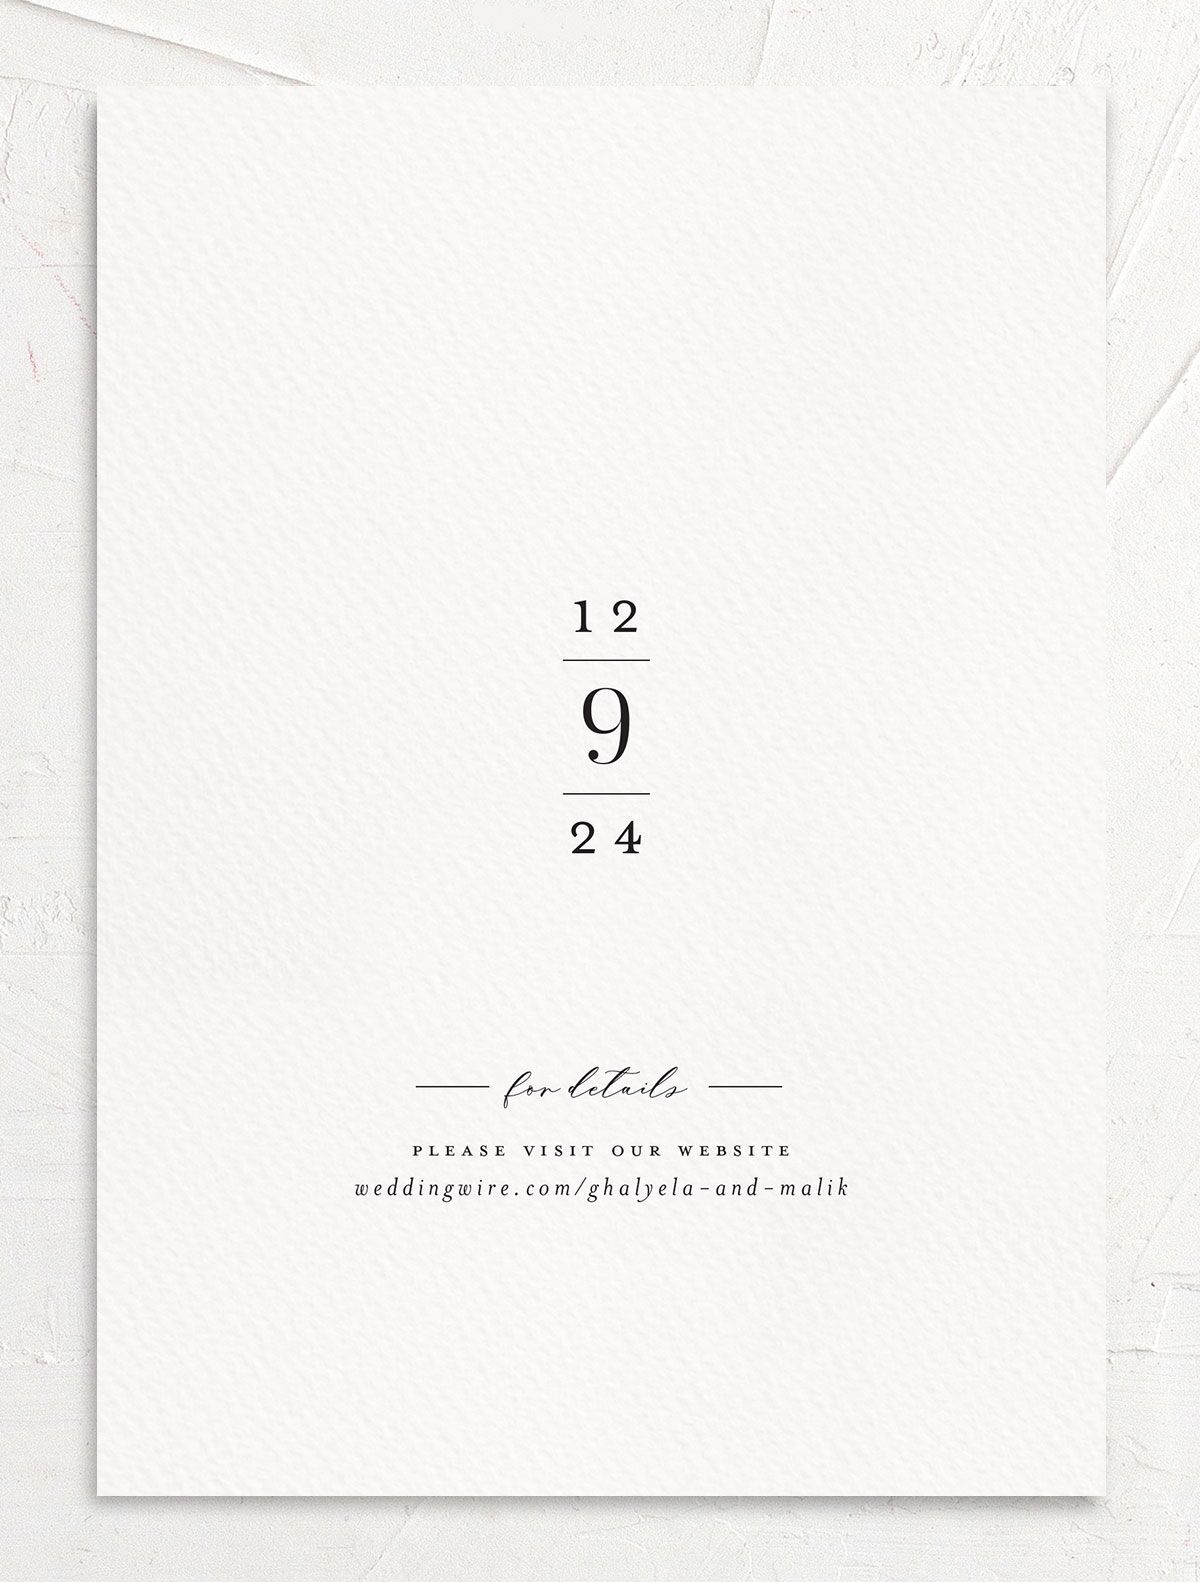 Festive Romance Save the Date Cards back in green